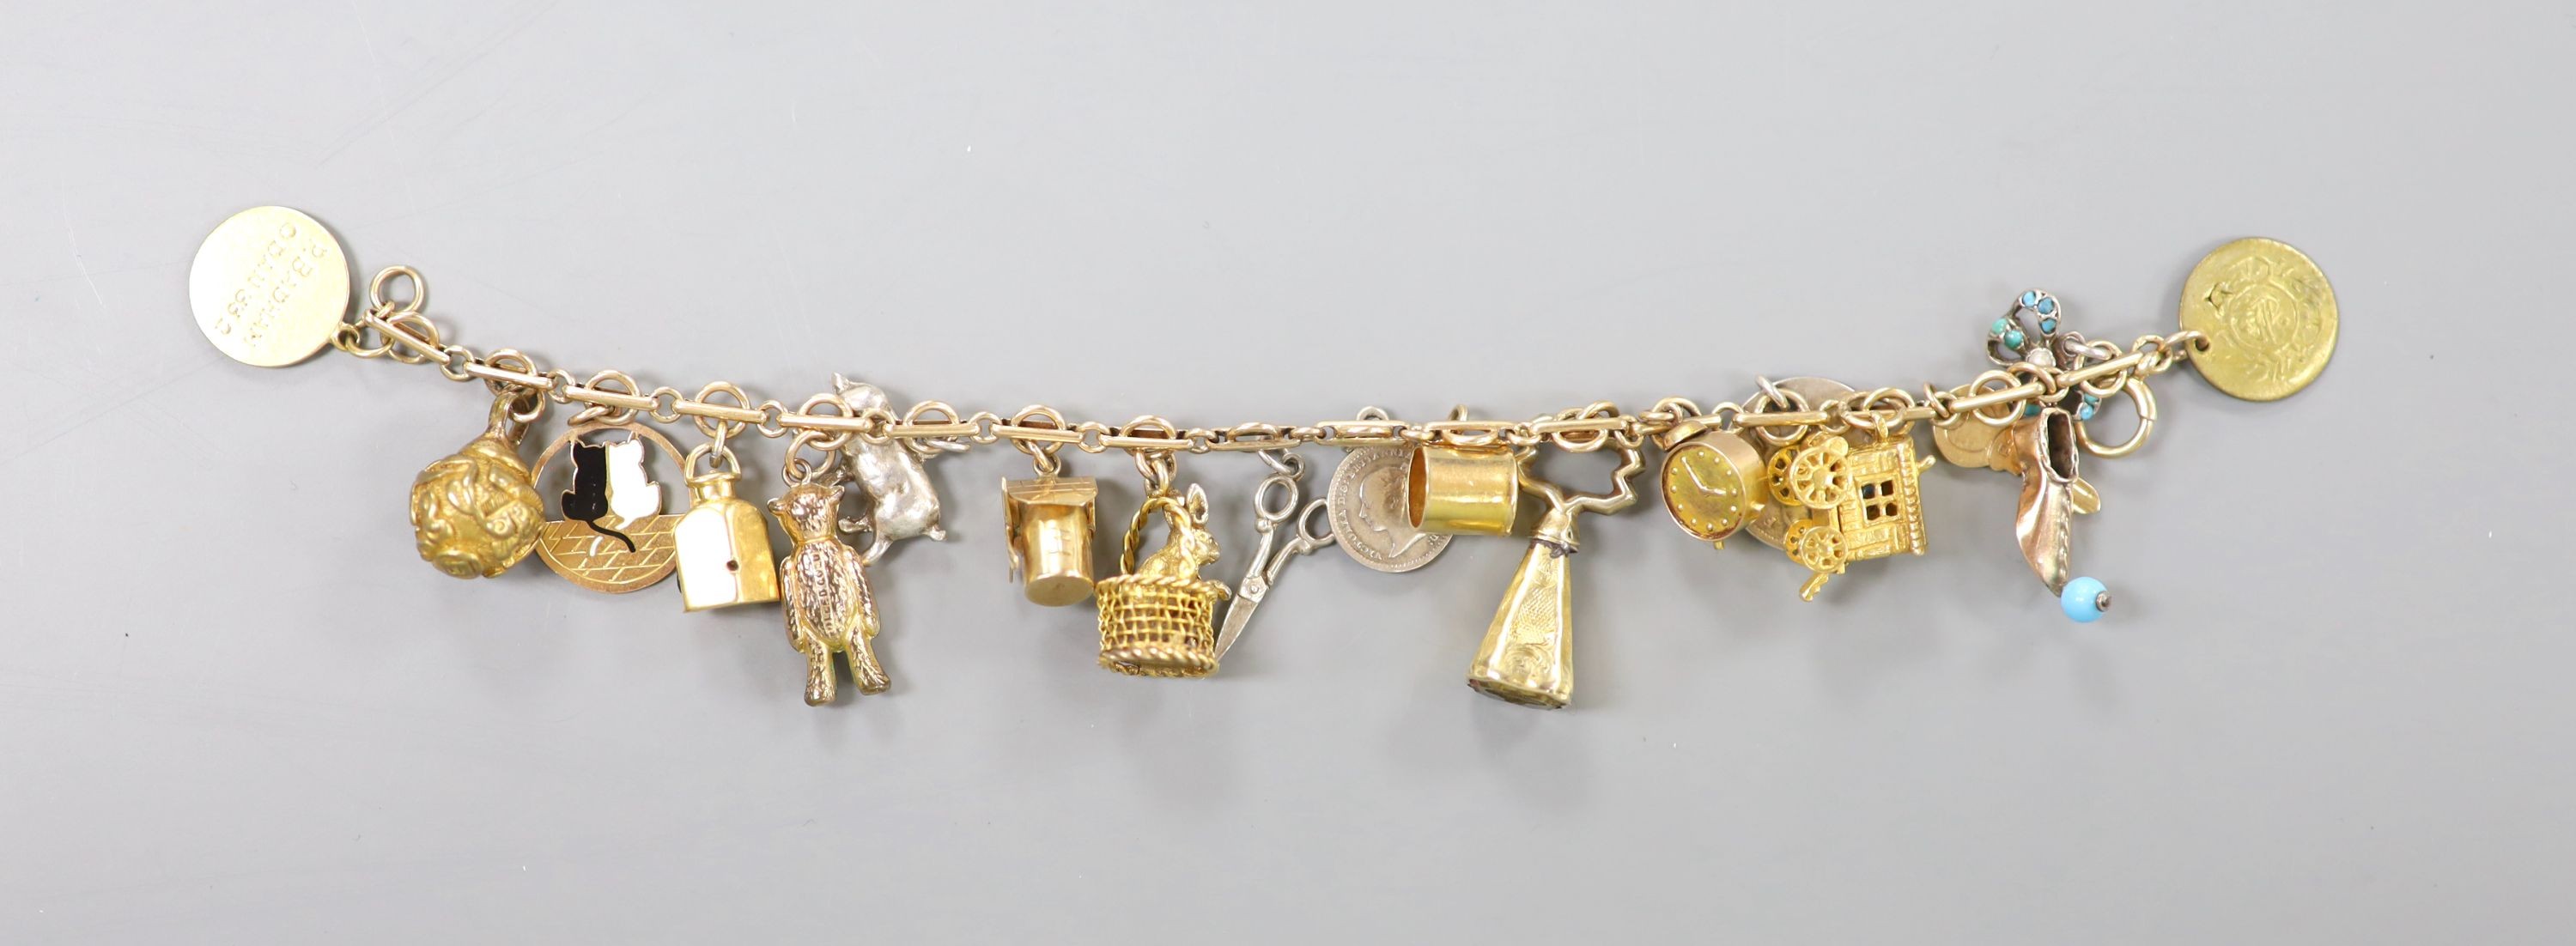 A 9ct charm bracelet, hung with assorted charms, gross weight 38.1 grams.